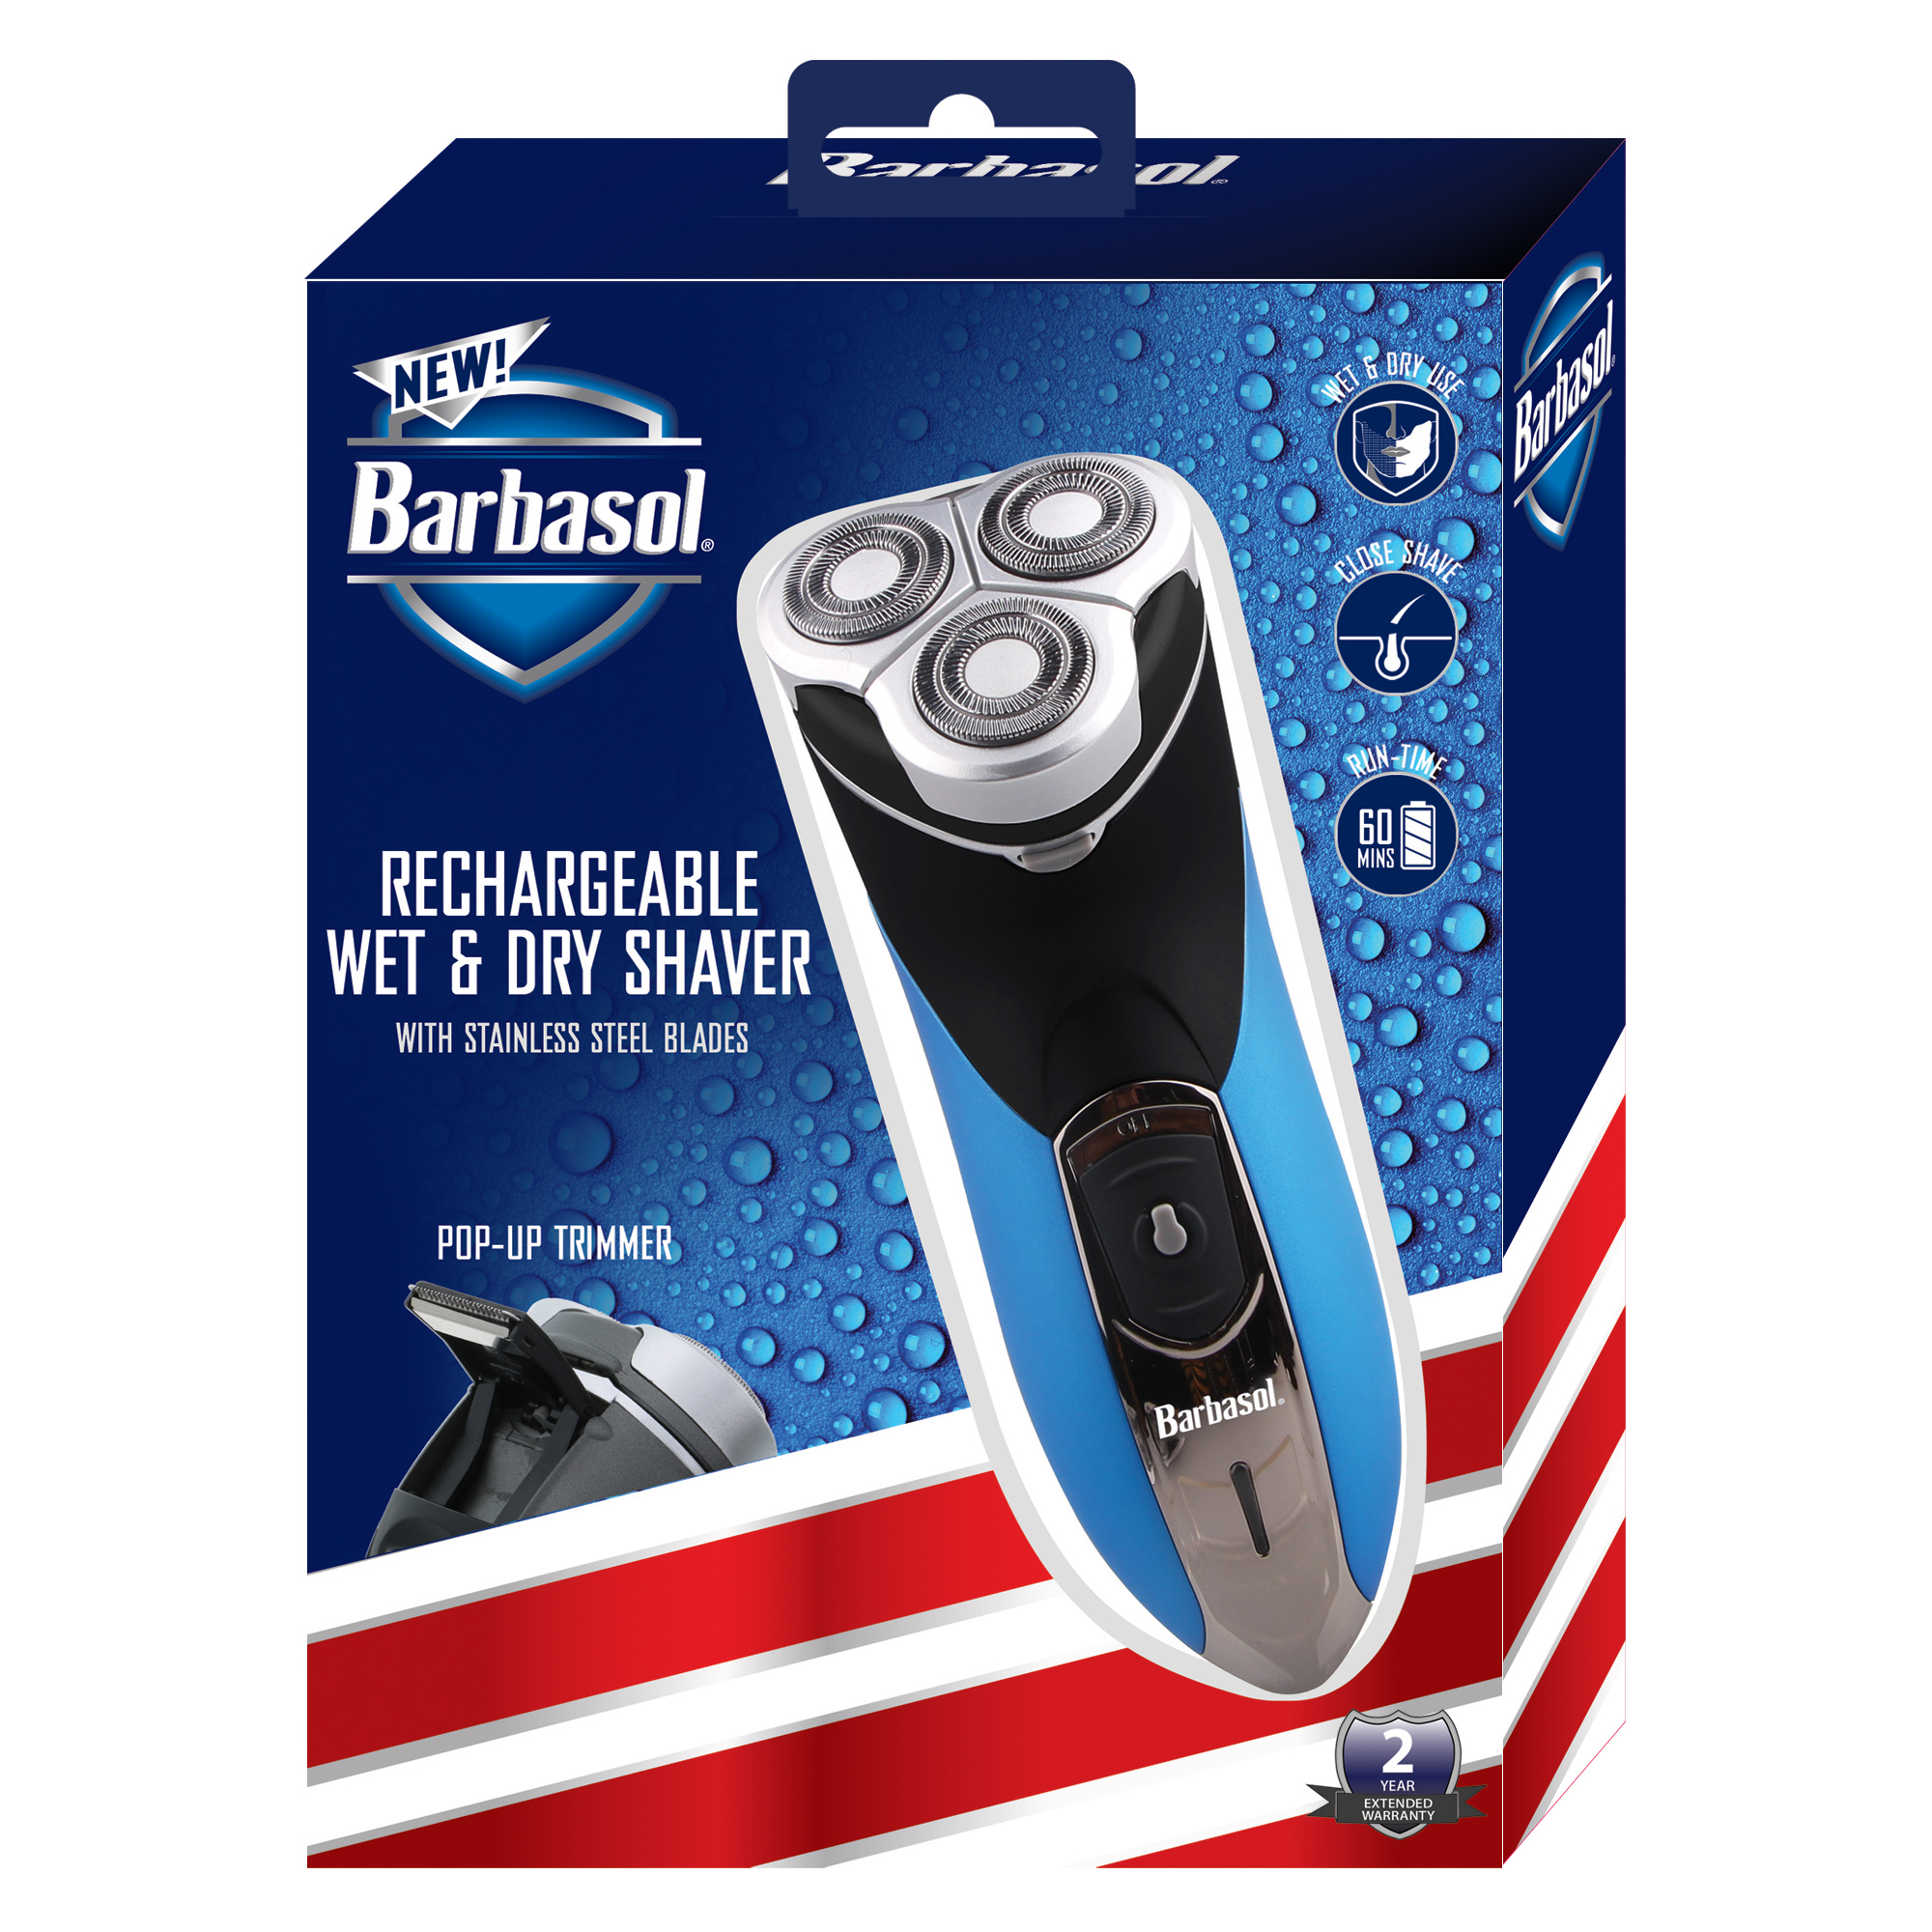 Wet and Shaver With Pop-Up Trimmer Barbasol